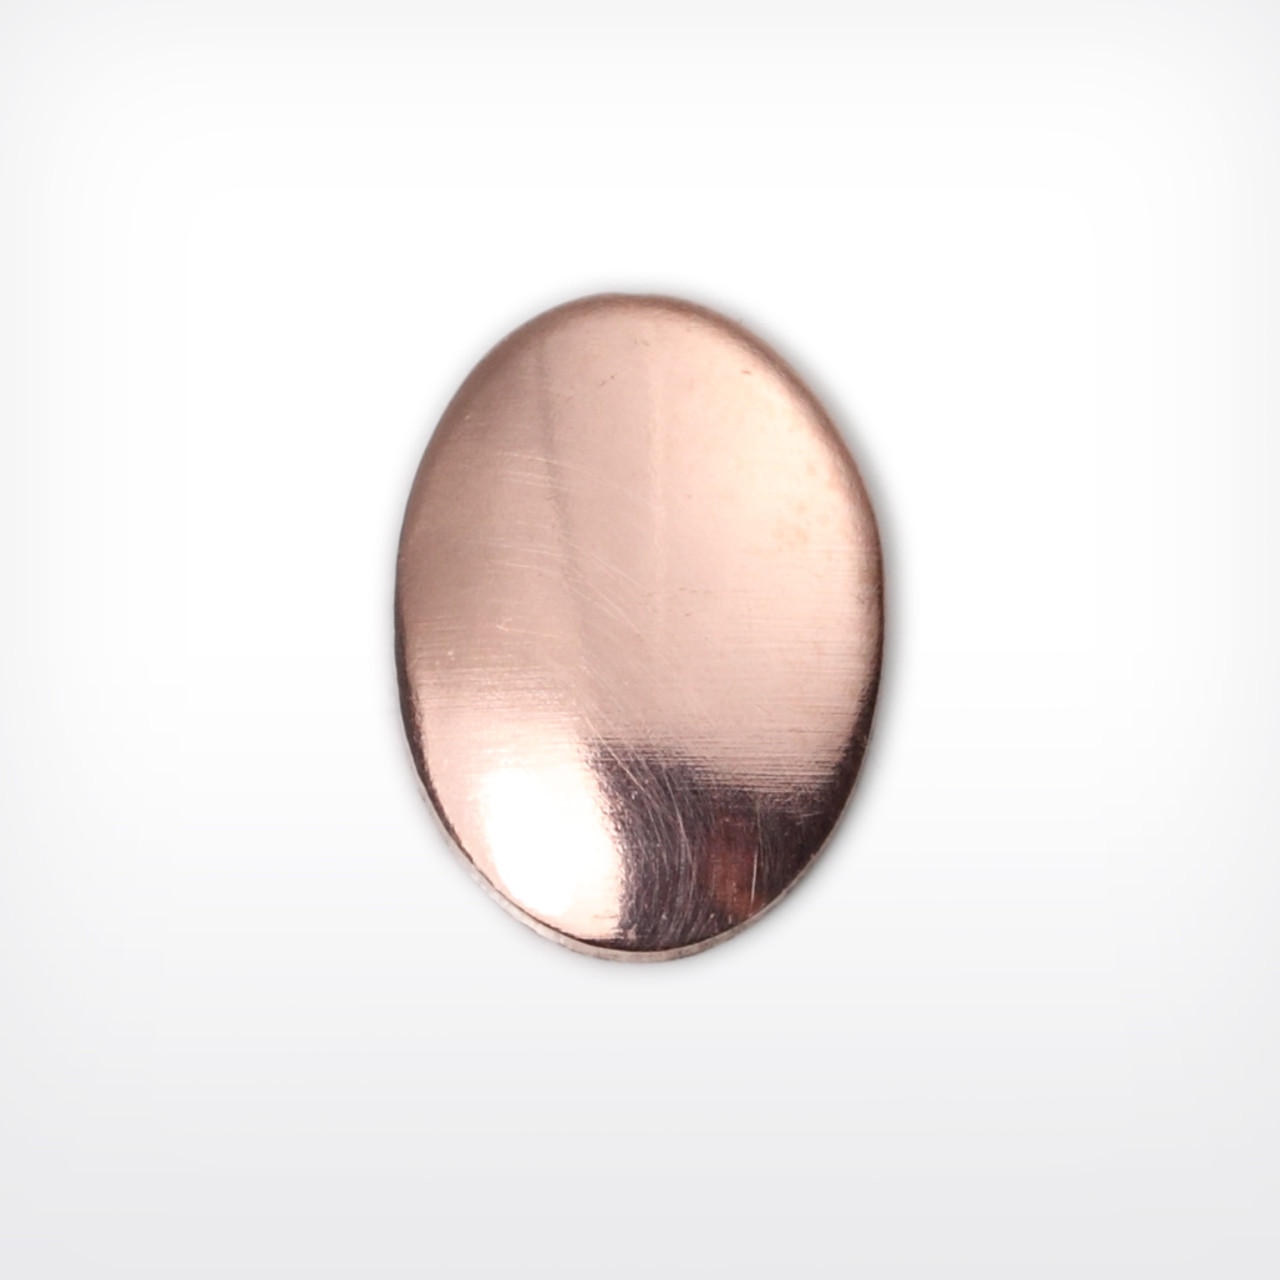 Domed Copper Oval, 10x8mm - Pack of 10 (698-CU) - SALE PRICE: 50% OFF